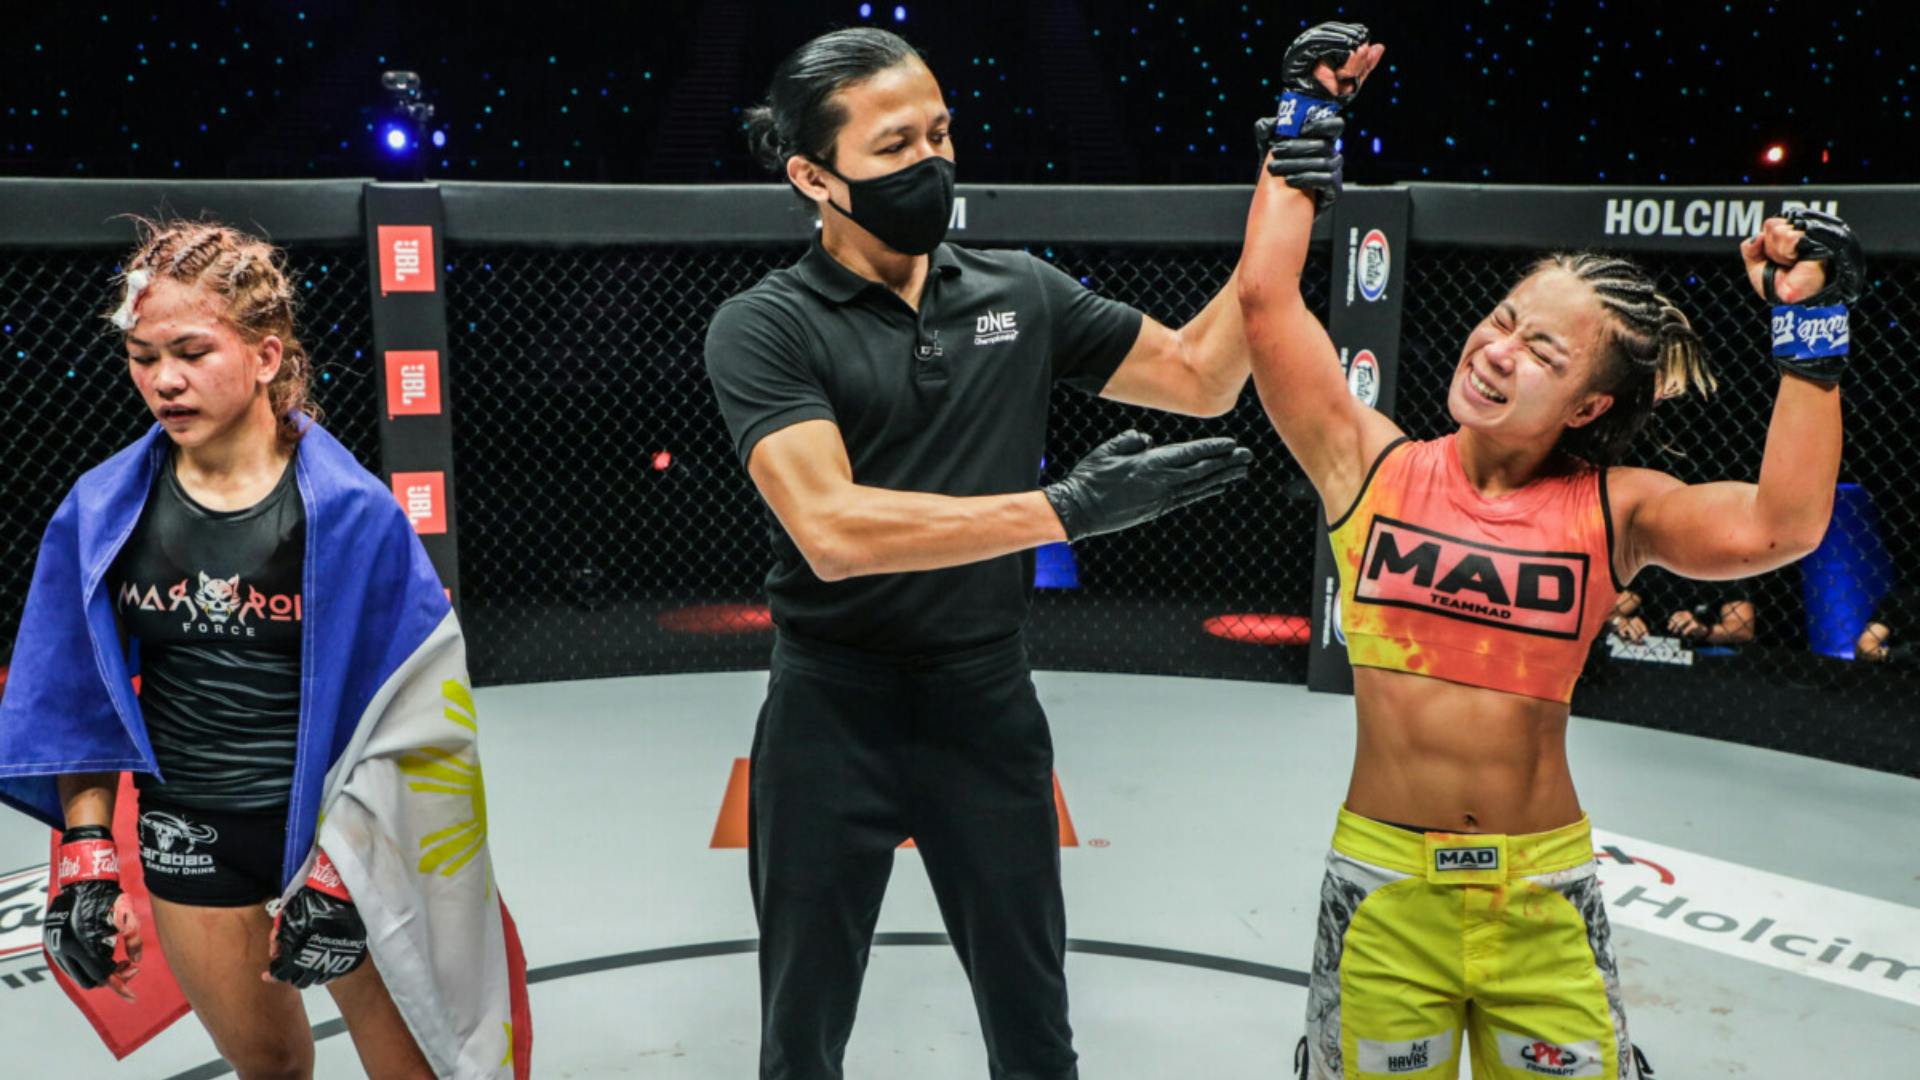 Grudge match vs. Ham? Possible replacement opponents for Denice Zamboanga at ONE 167